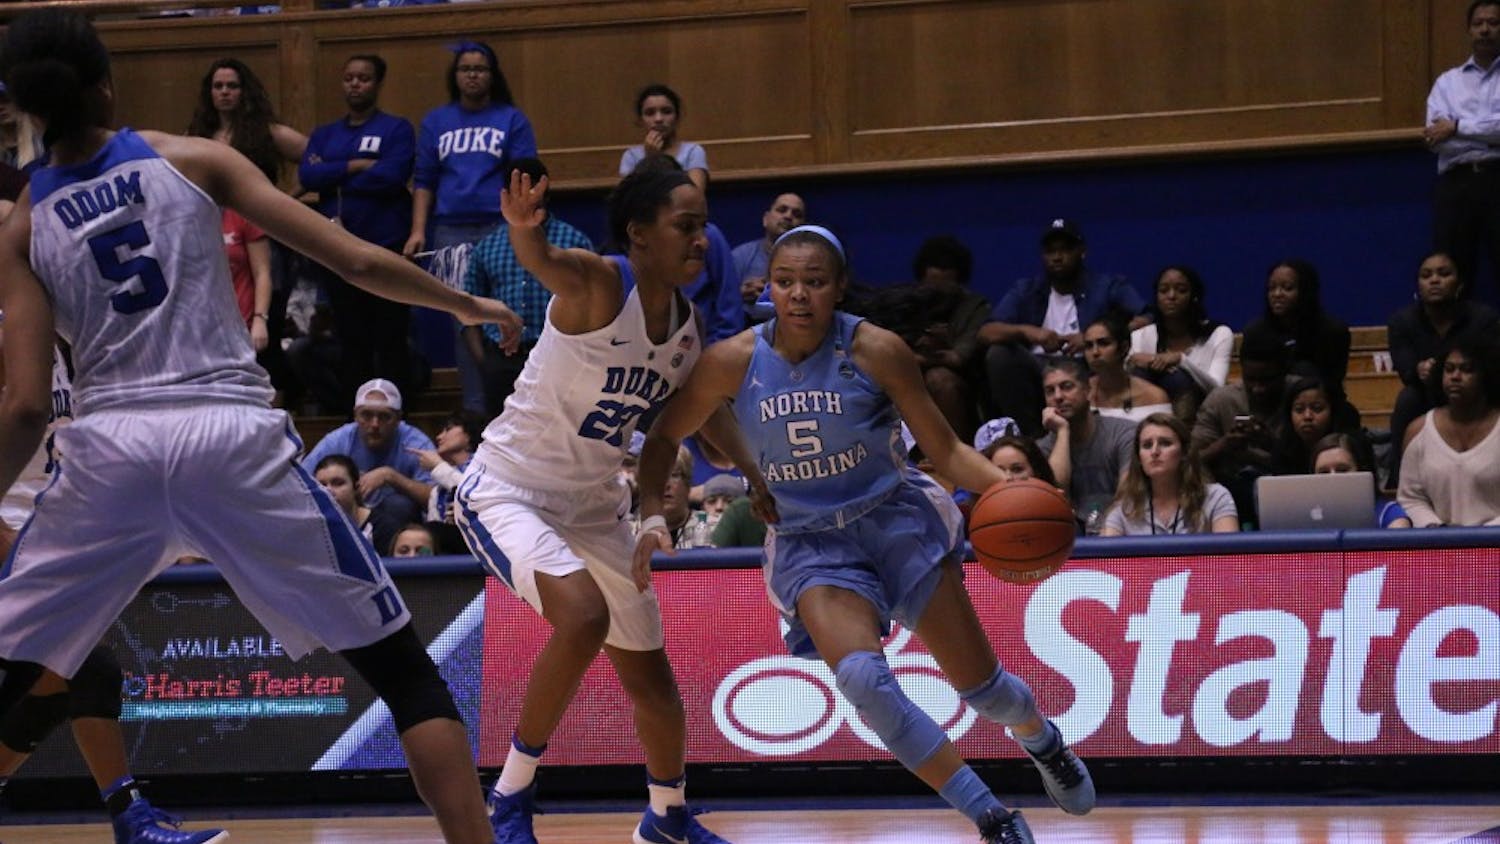 UNC sophomore guard Stephanie Watts (5) dribbles along the baseline at Cameron Indoor Stadium. The Tar Heels lost 70-58 to No. 12 Duke on Thursday.